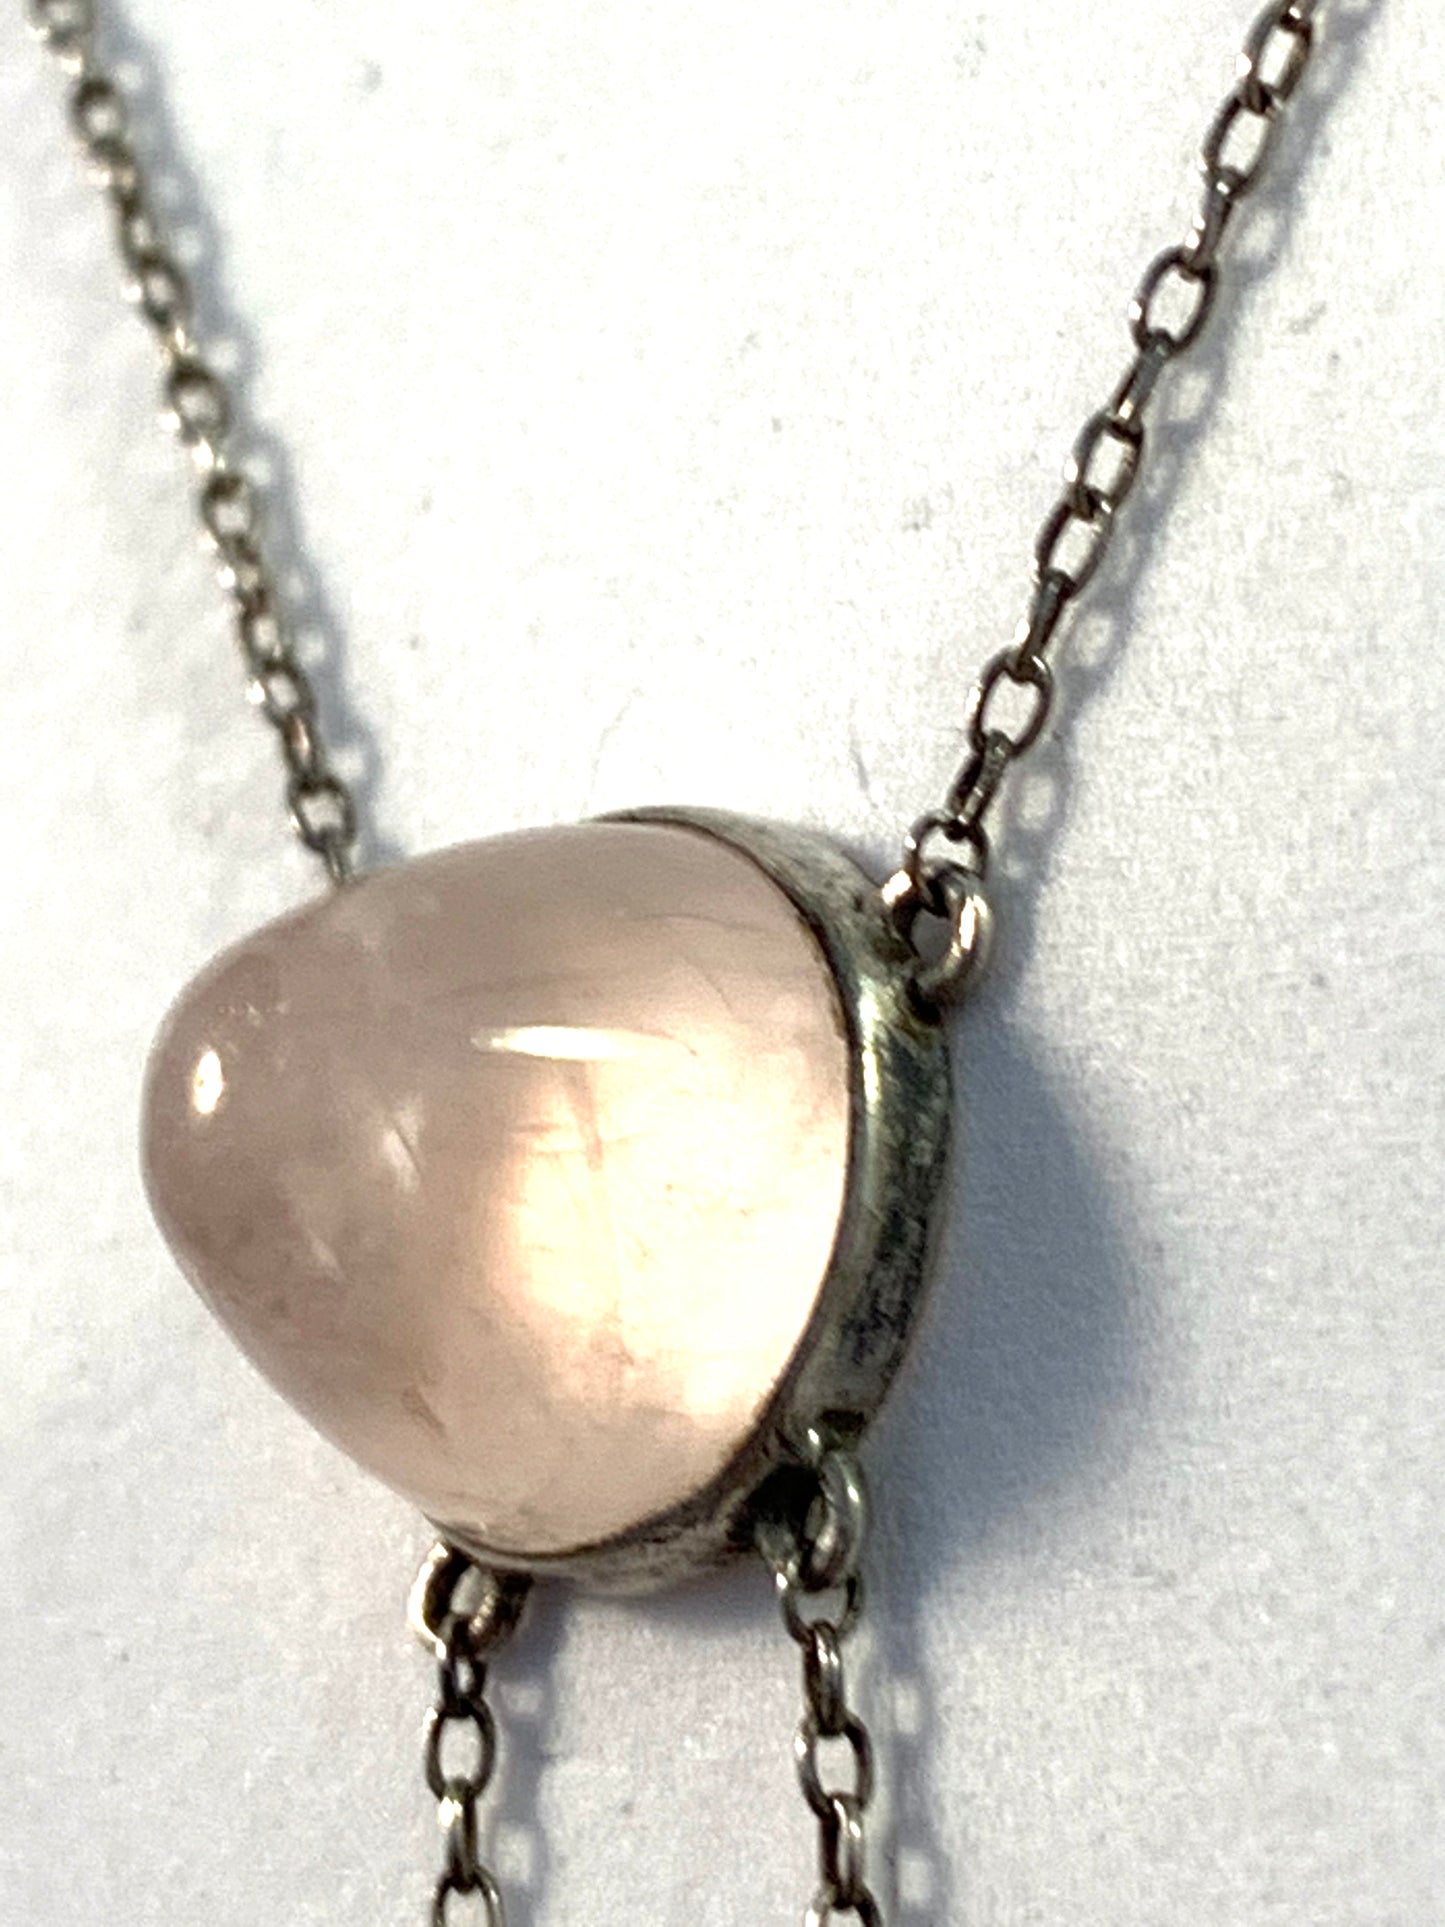 Sweden early 1900s Edwardian Solid Silver Rose Quartz Negligee Necklace.